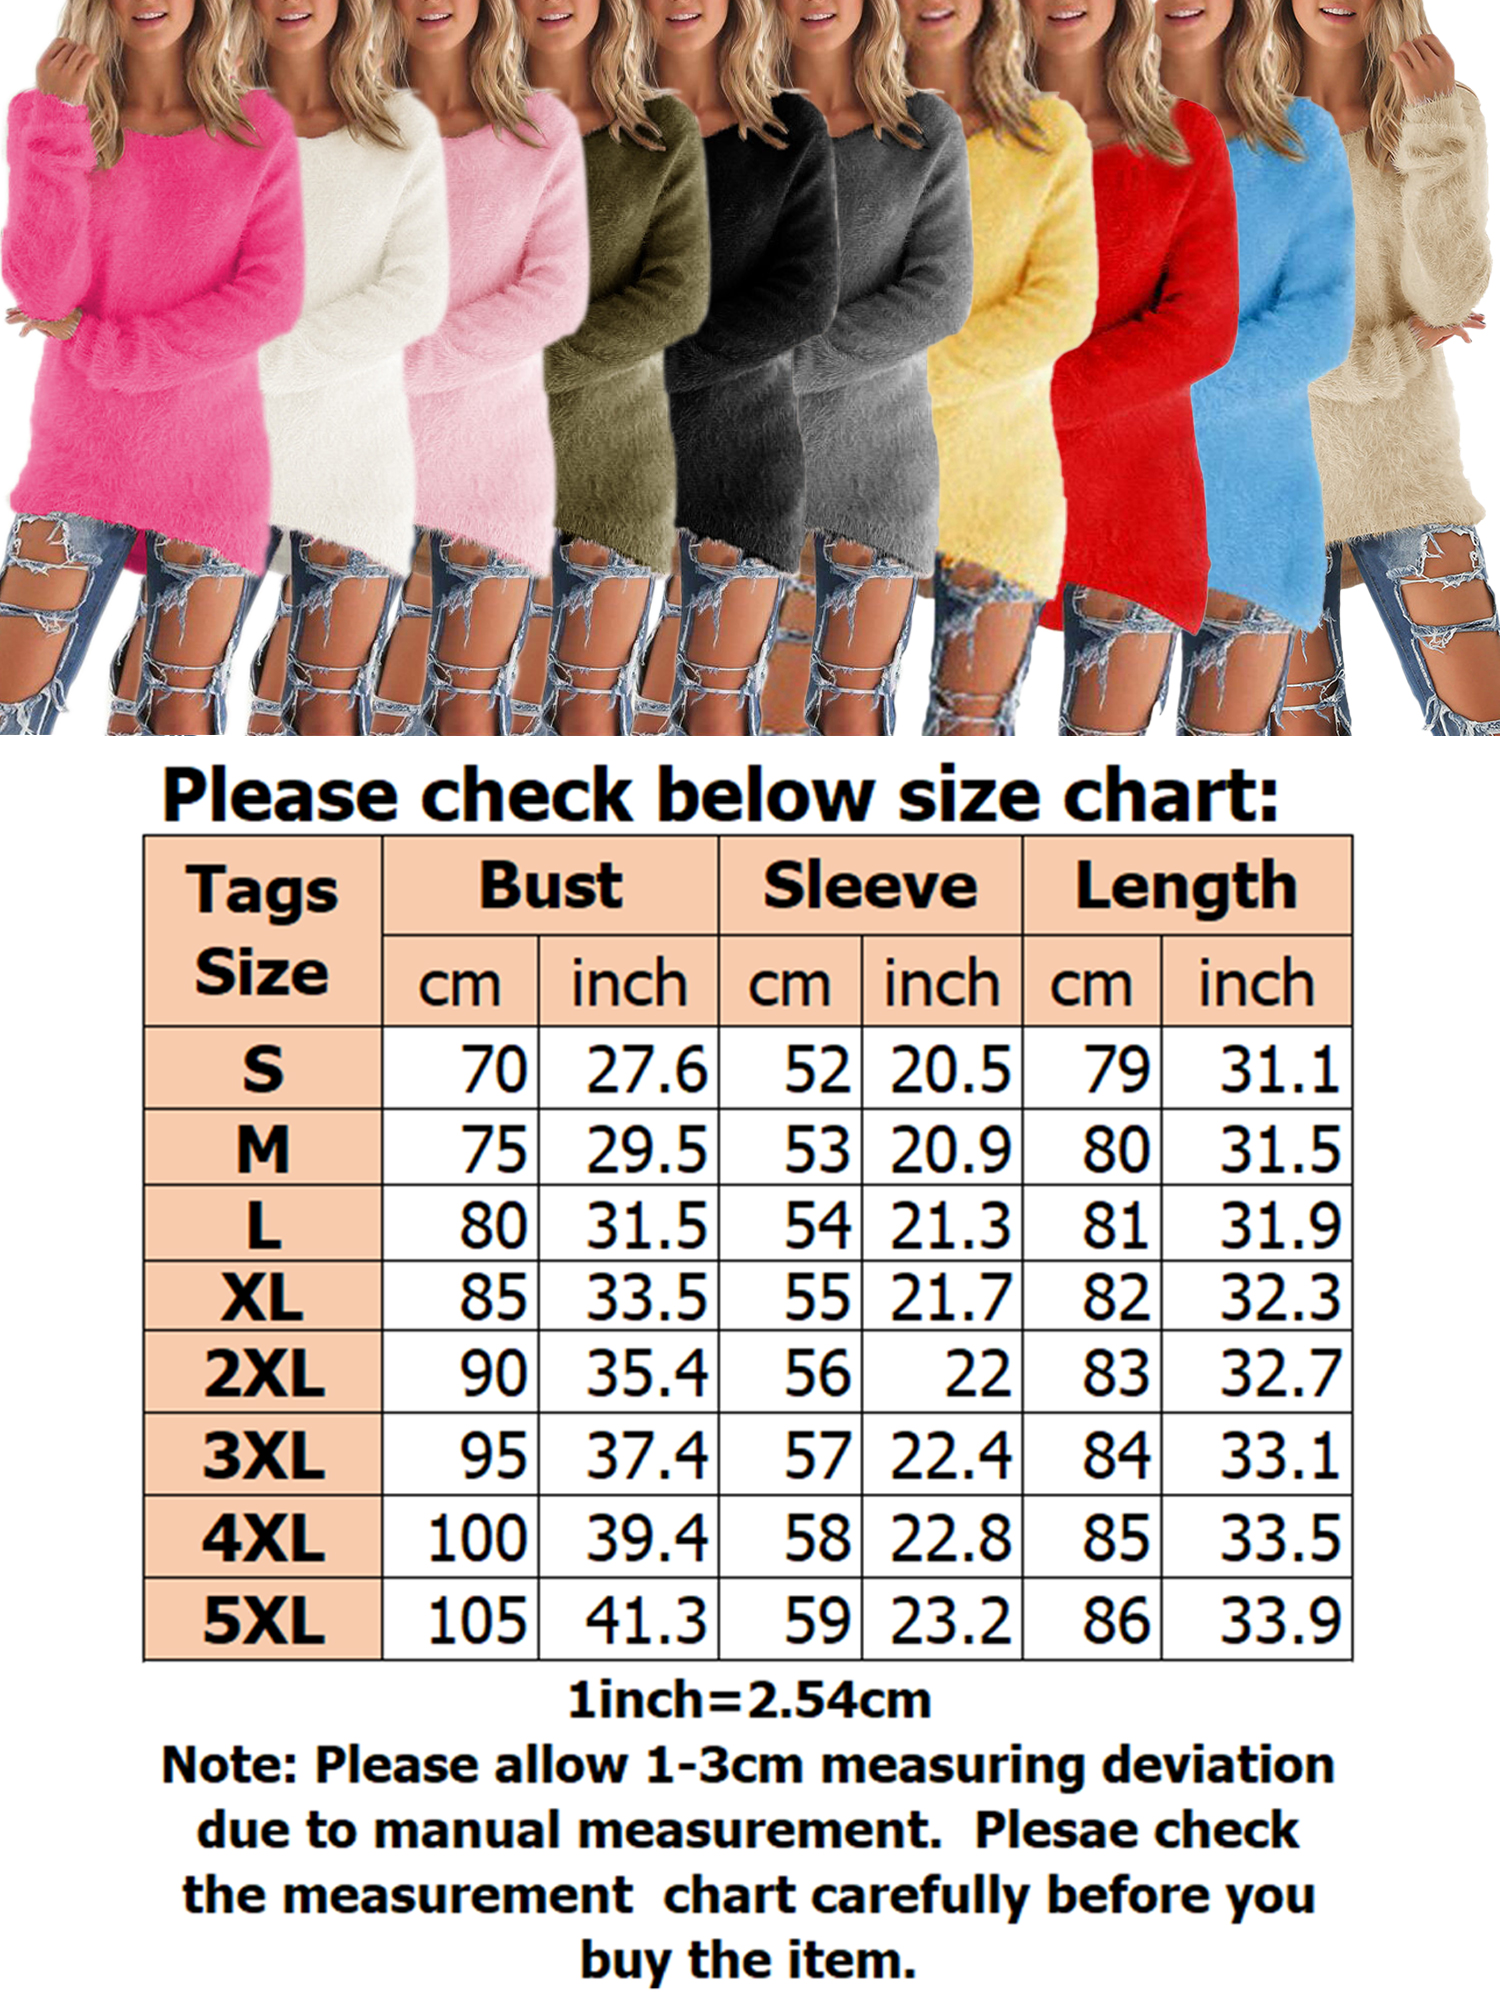 Plus Size Women Mid-Length Loose Solid Color Pullover Sweaters High Low Fluffy Tunics Crew Neck Womens Knit Tops for Junior Ladies Women - image 2 of 2